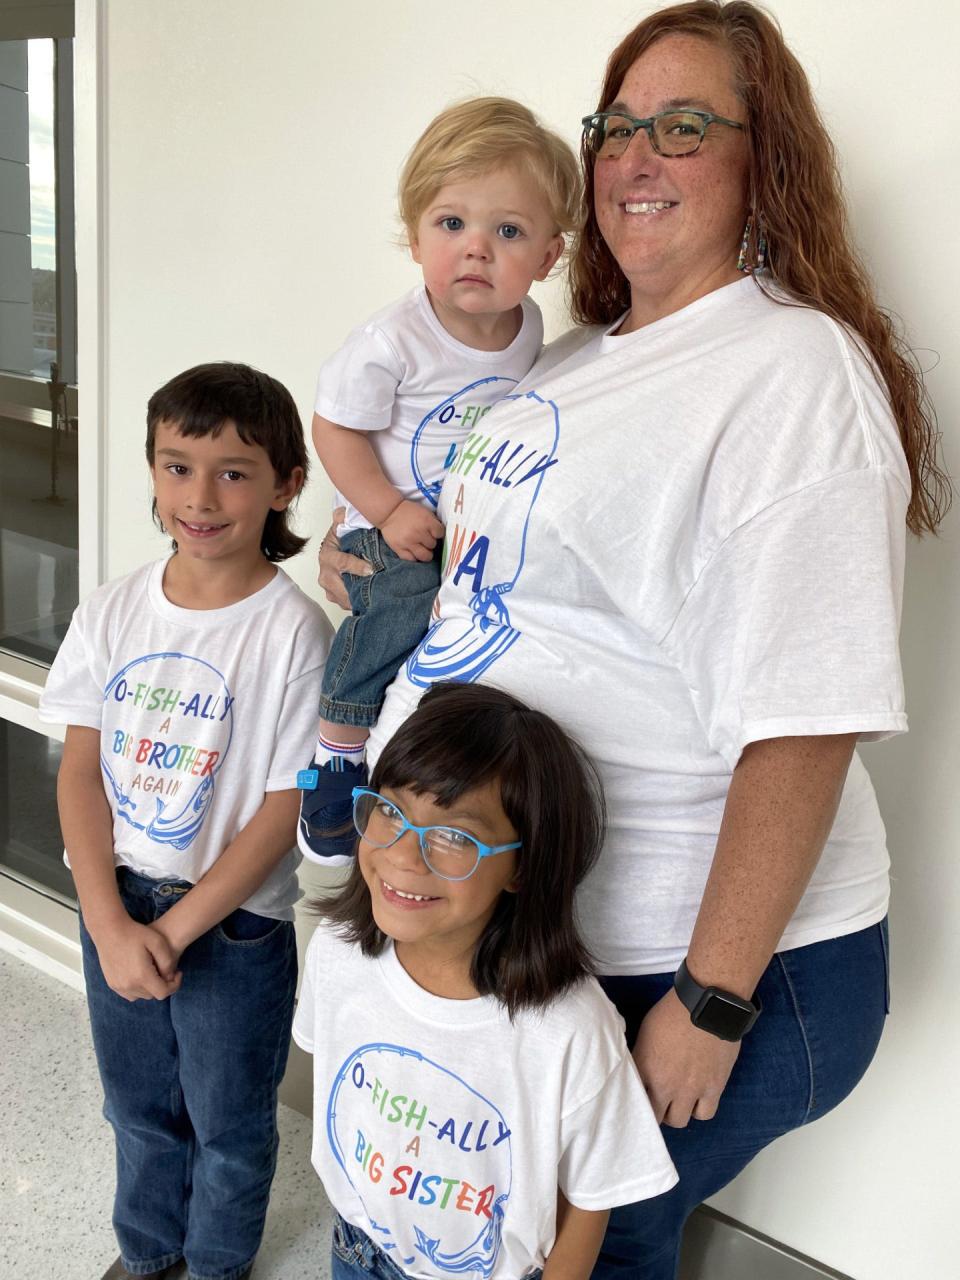 The Voigts Family, including mom Sarah, and siblings Konnor, 8, Kayliana, 6, and Kayde Reese, 16 months, celebrate National Adoption Day Friday, Nov. 3, 2023, by "O-fish-ally" welcoming Kayde into their family.